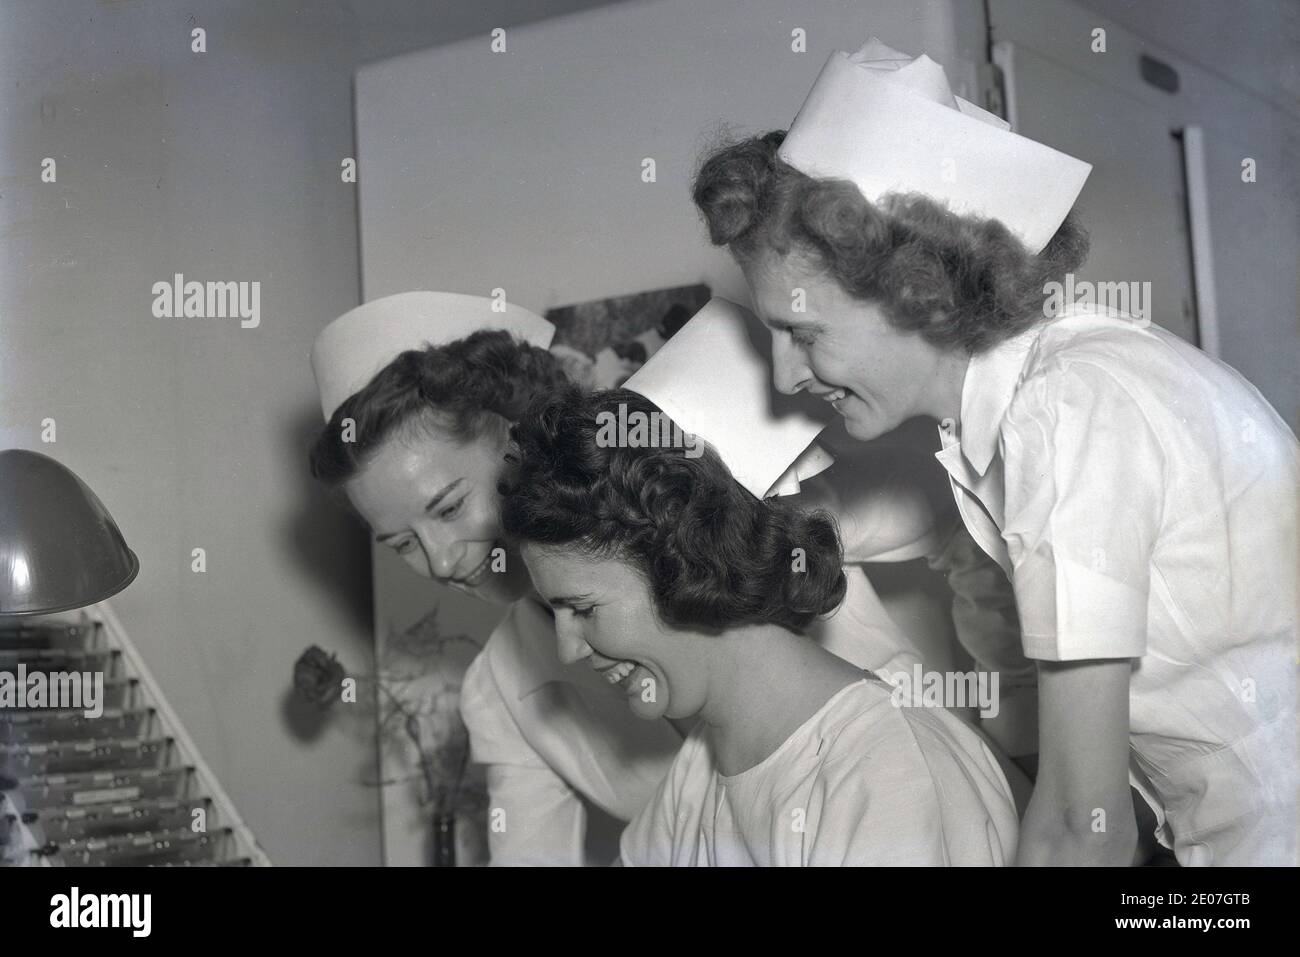 1940s, historical, three nurses in their uniforms and caps of the era in a hospital ward having a chuckle together, USA Stock Photo